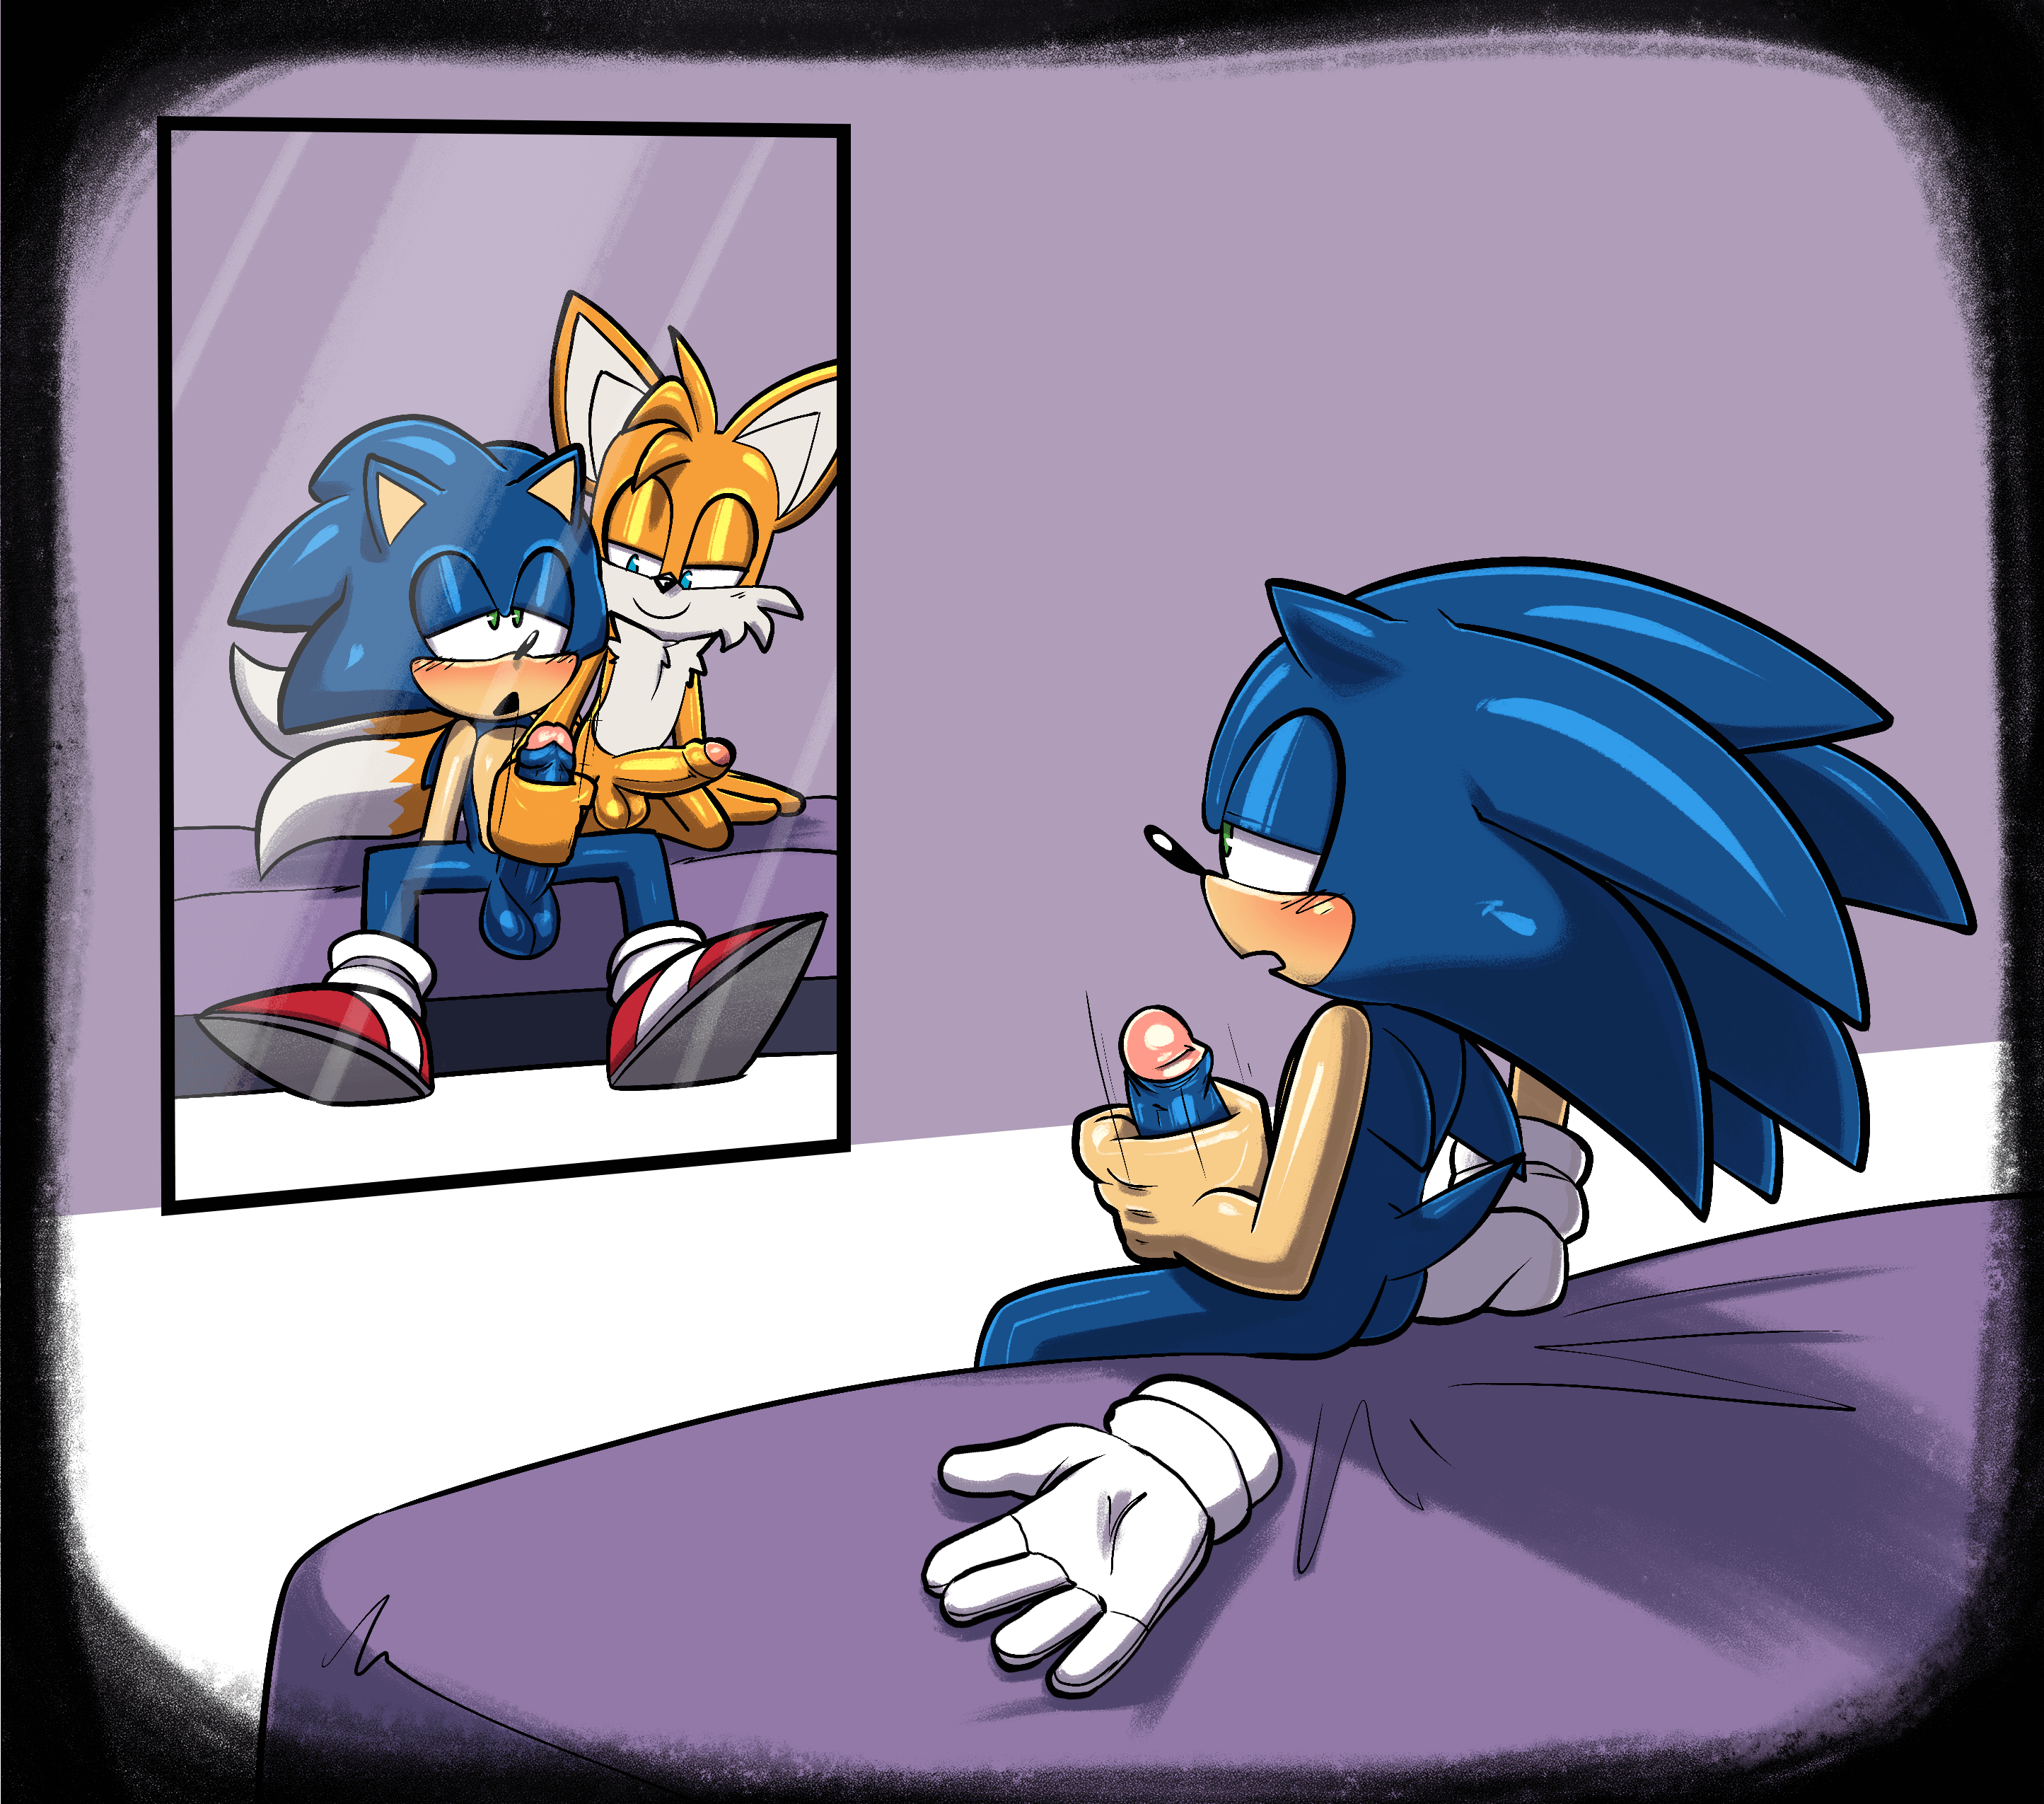 A scene depicting Sonic sat on the edge of a bed, facing a mirror while stroking his cock off, mouth agape and face flushed. In the mirror, there is a reflection of himself, but in the reflection Tails is there and is stroking Sonic’s cock off instead. The palette of the room actually kinda looks like the Ace pride flag! This wasn’t in my notes and Honeydew hasn’t mentioned anything about it, so it might just be a happy accident. Looks lovely, though! When clicked on, the image links back to Honeydew’s Ko-fi!